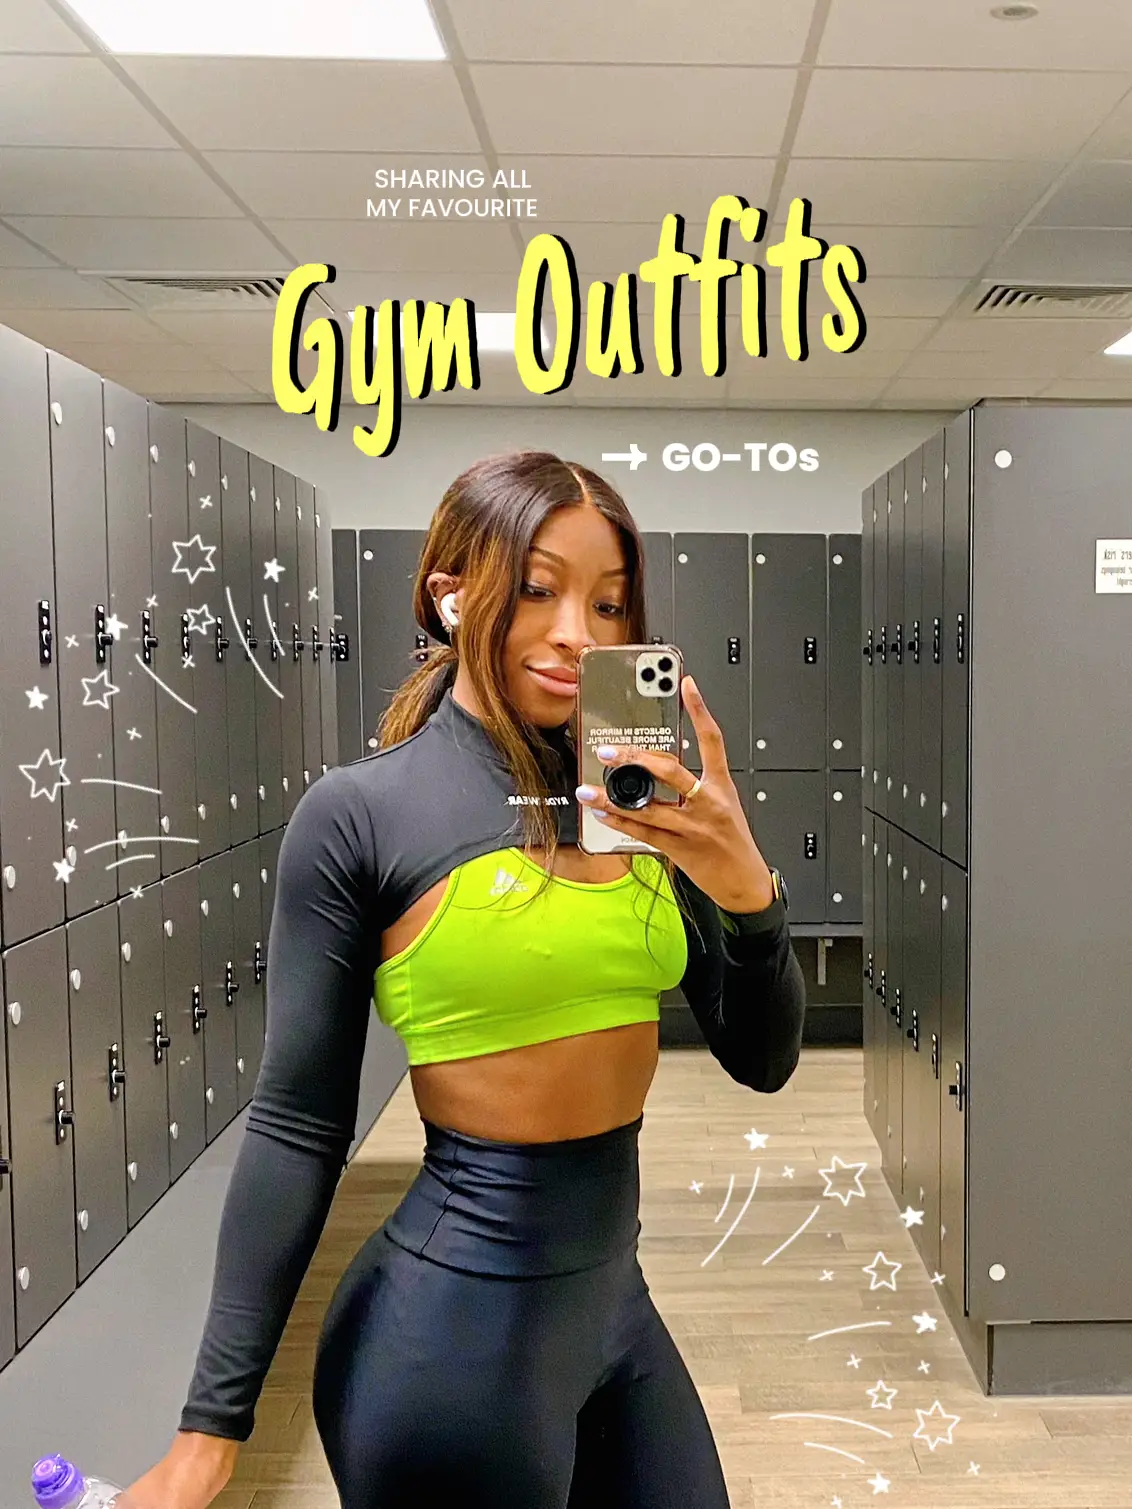 Favourite gym outfits 🏋🏾‍♀️🍋, Gallery posted by Kirsty